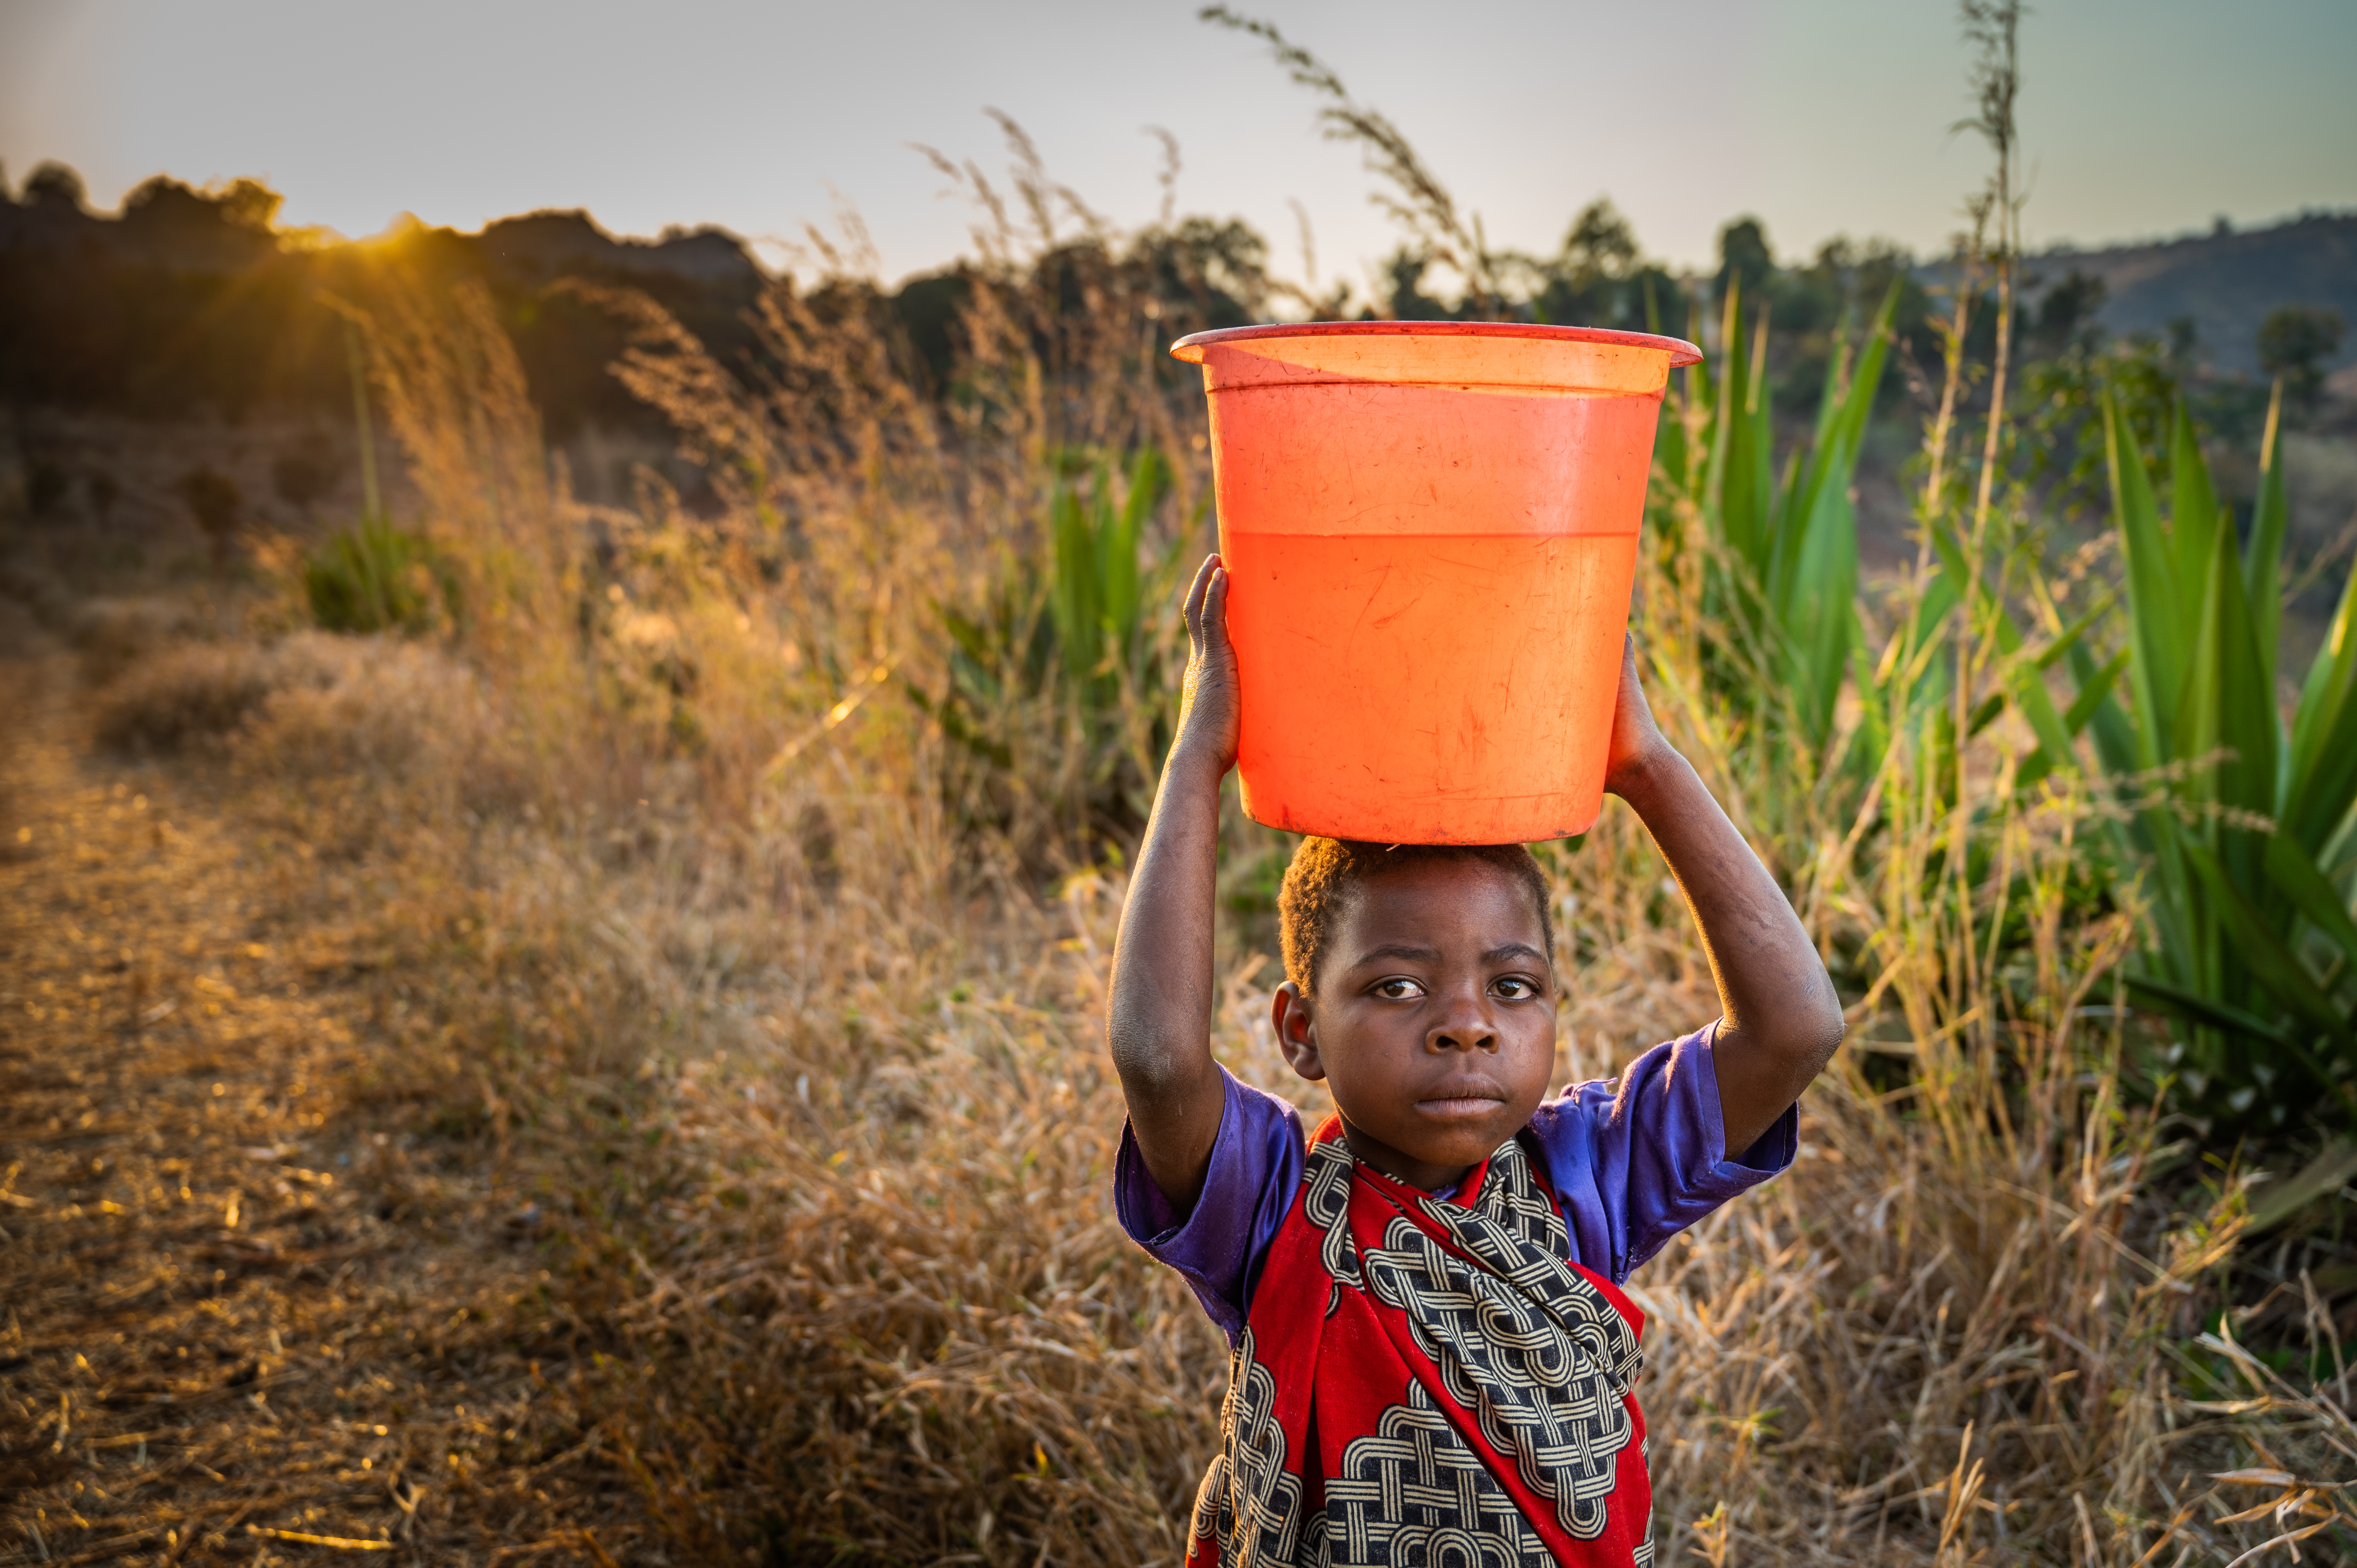 Girl from Malawi carries water in a bucket on her head